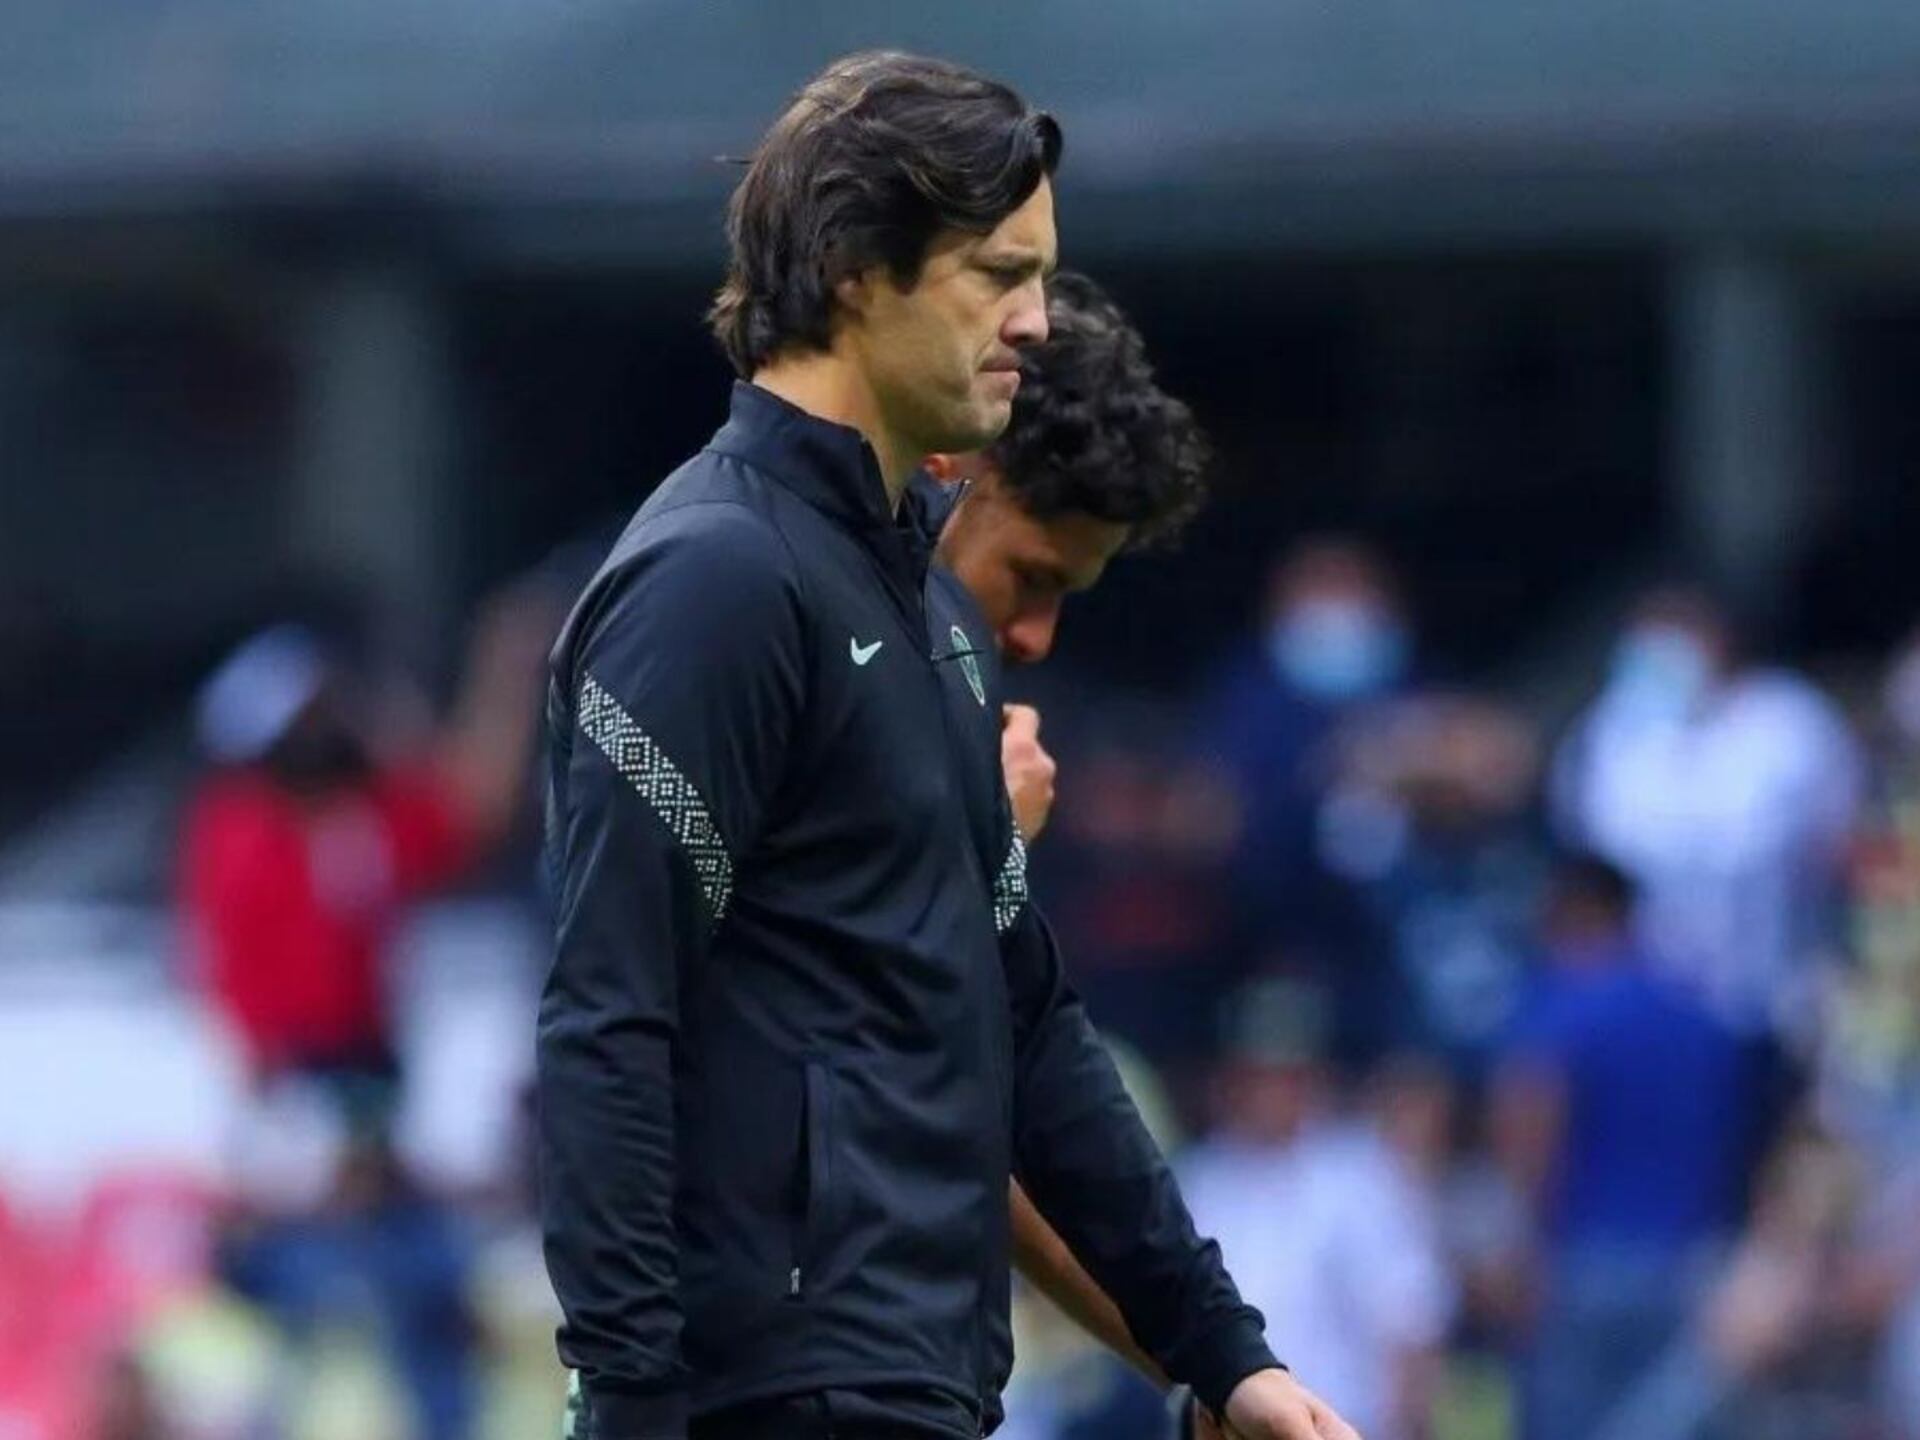 Santiago Solari’s replacement in Club América could arrive from Argentina